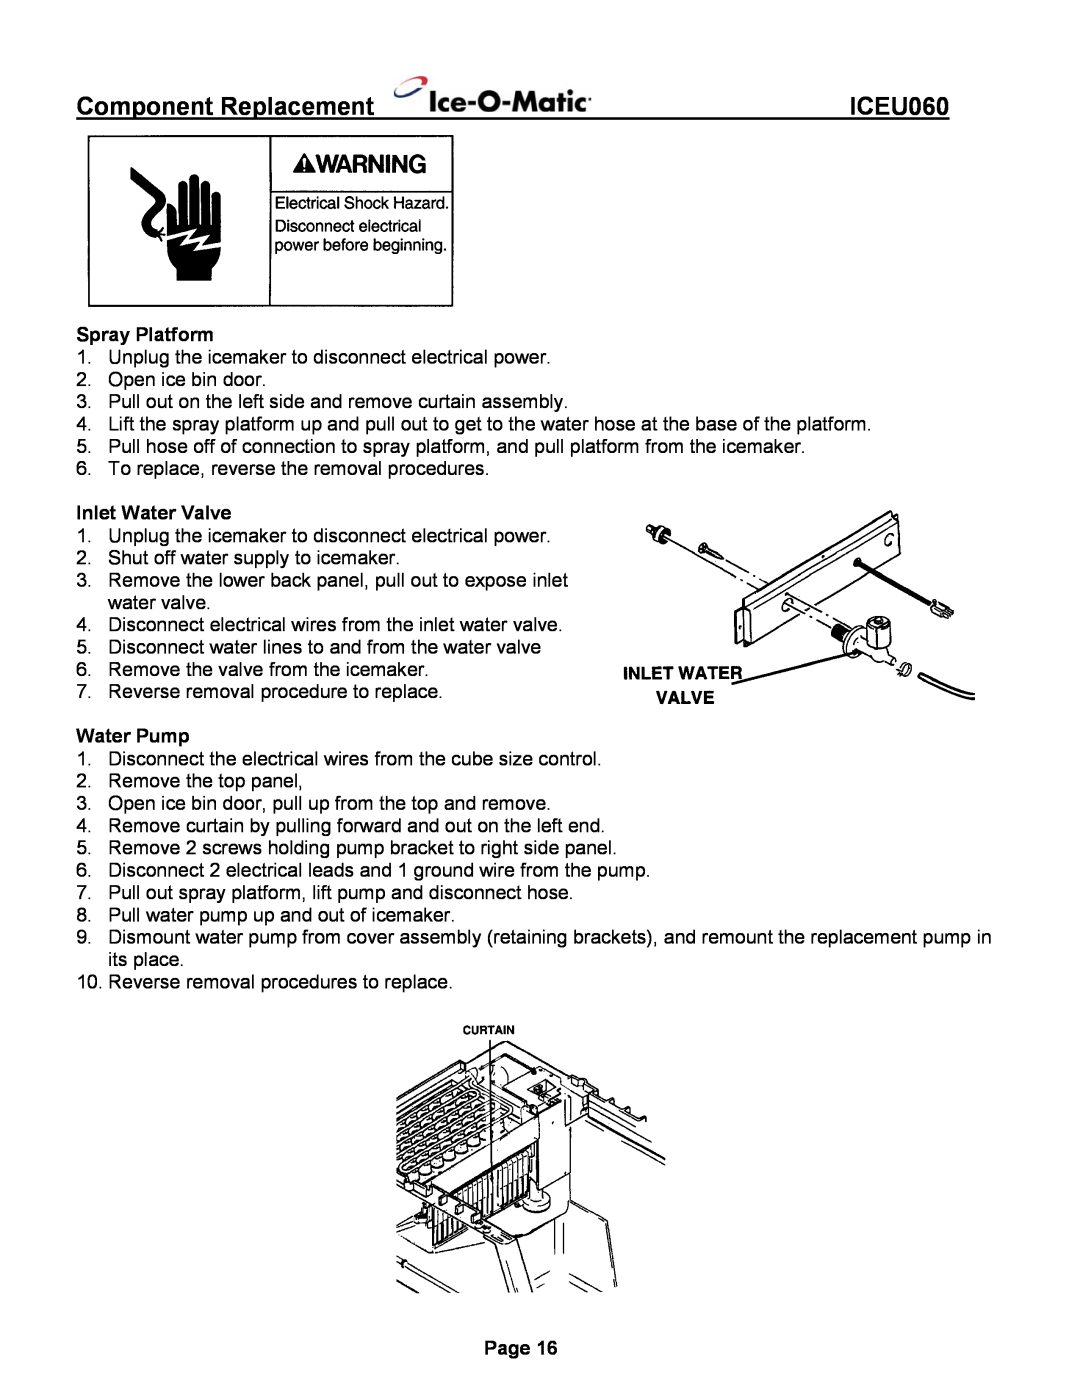 Ice-O-Matic ICEU060 installation manual Component Replacement, Spray Platform, Inlet Water Valve, Water Pump, Page 